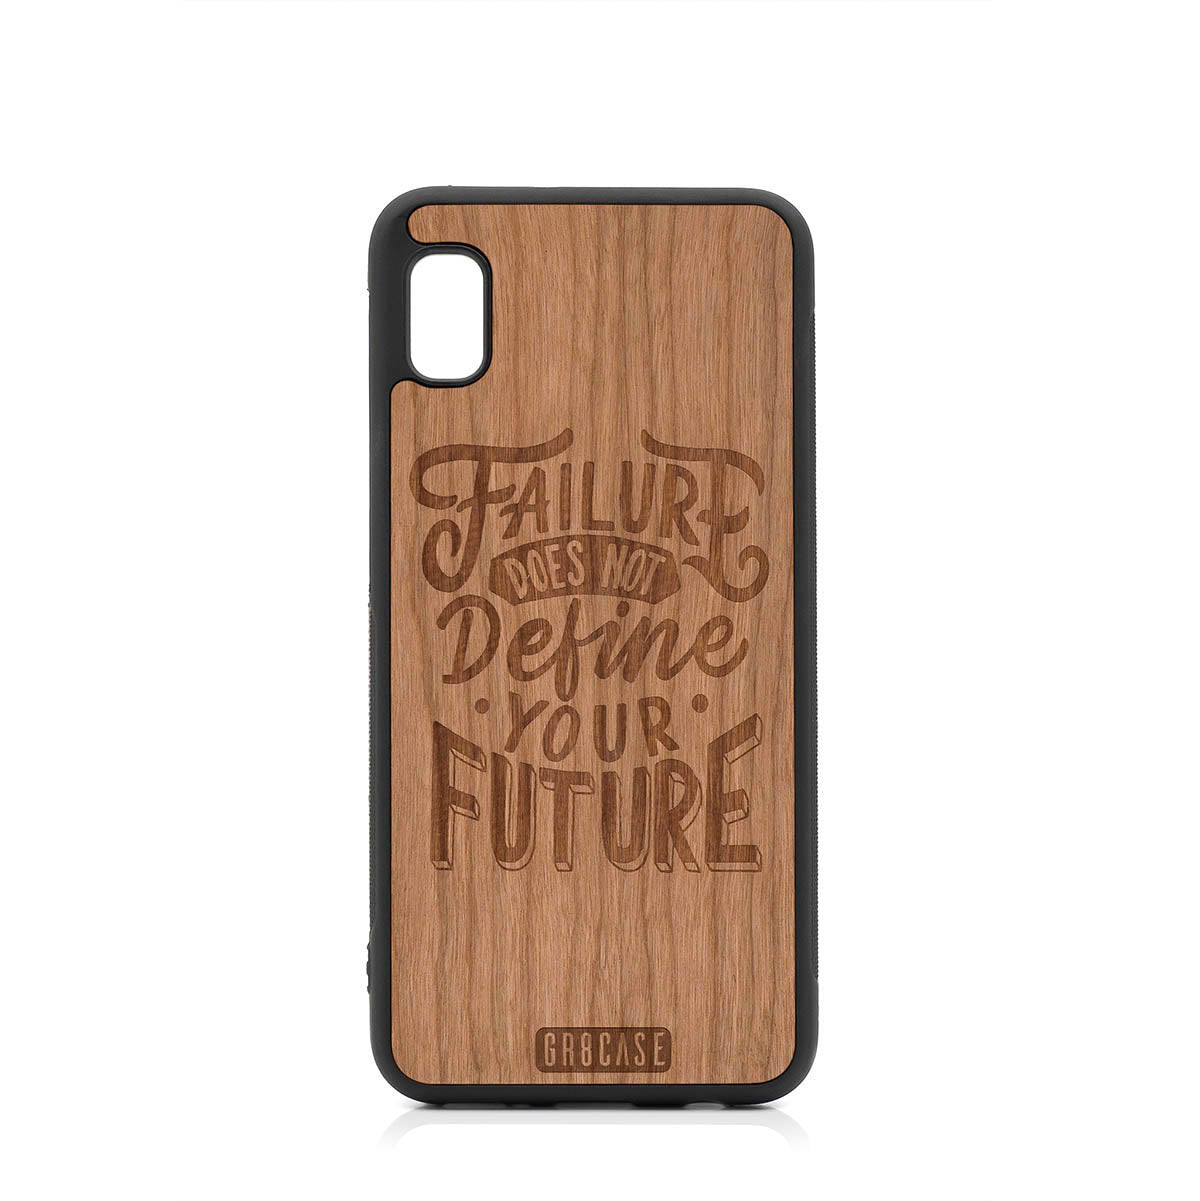 Failure Does Not Define You Future Design Wood Case For Samsung Galaxy A10E by GR8CASE